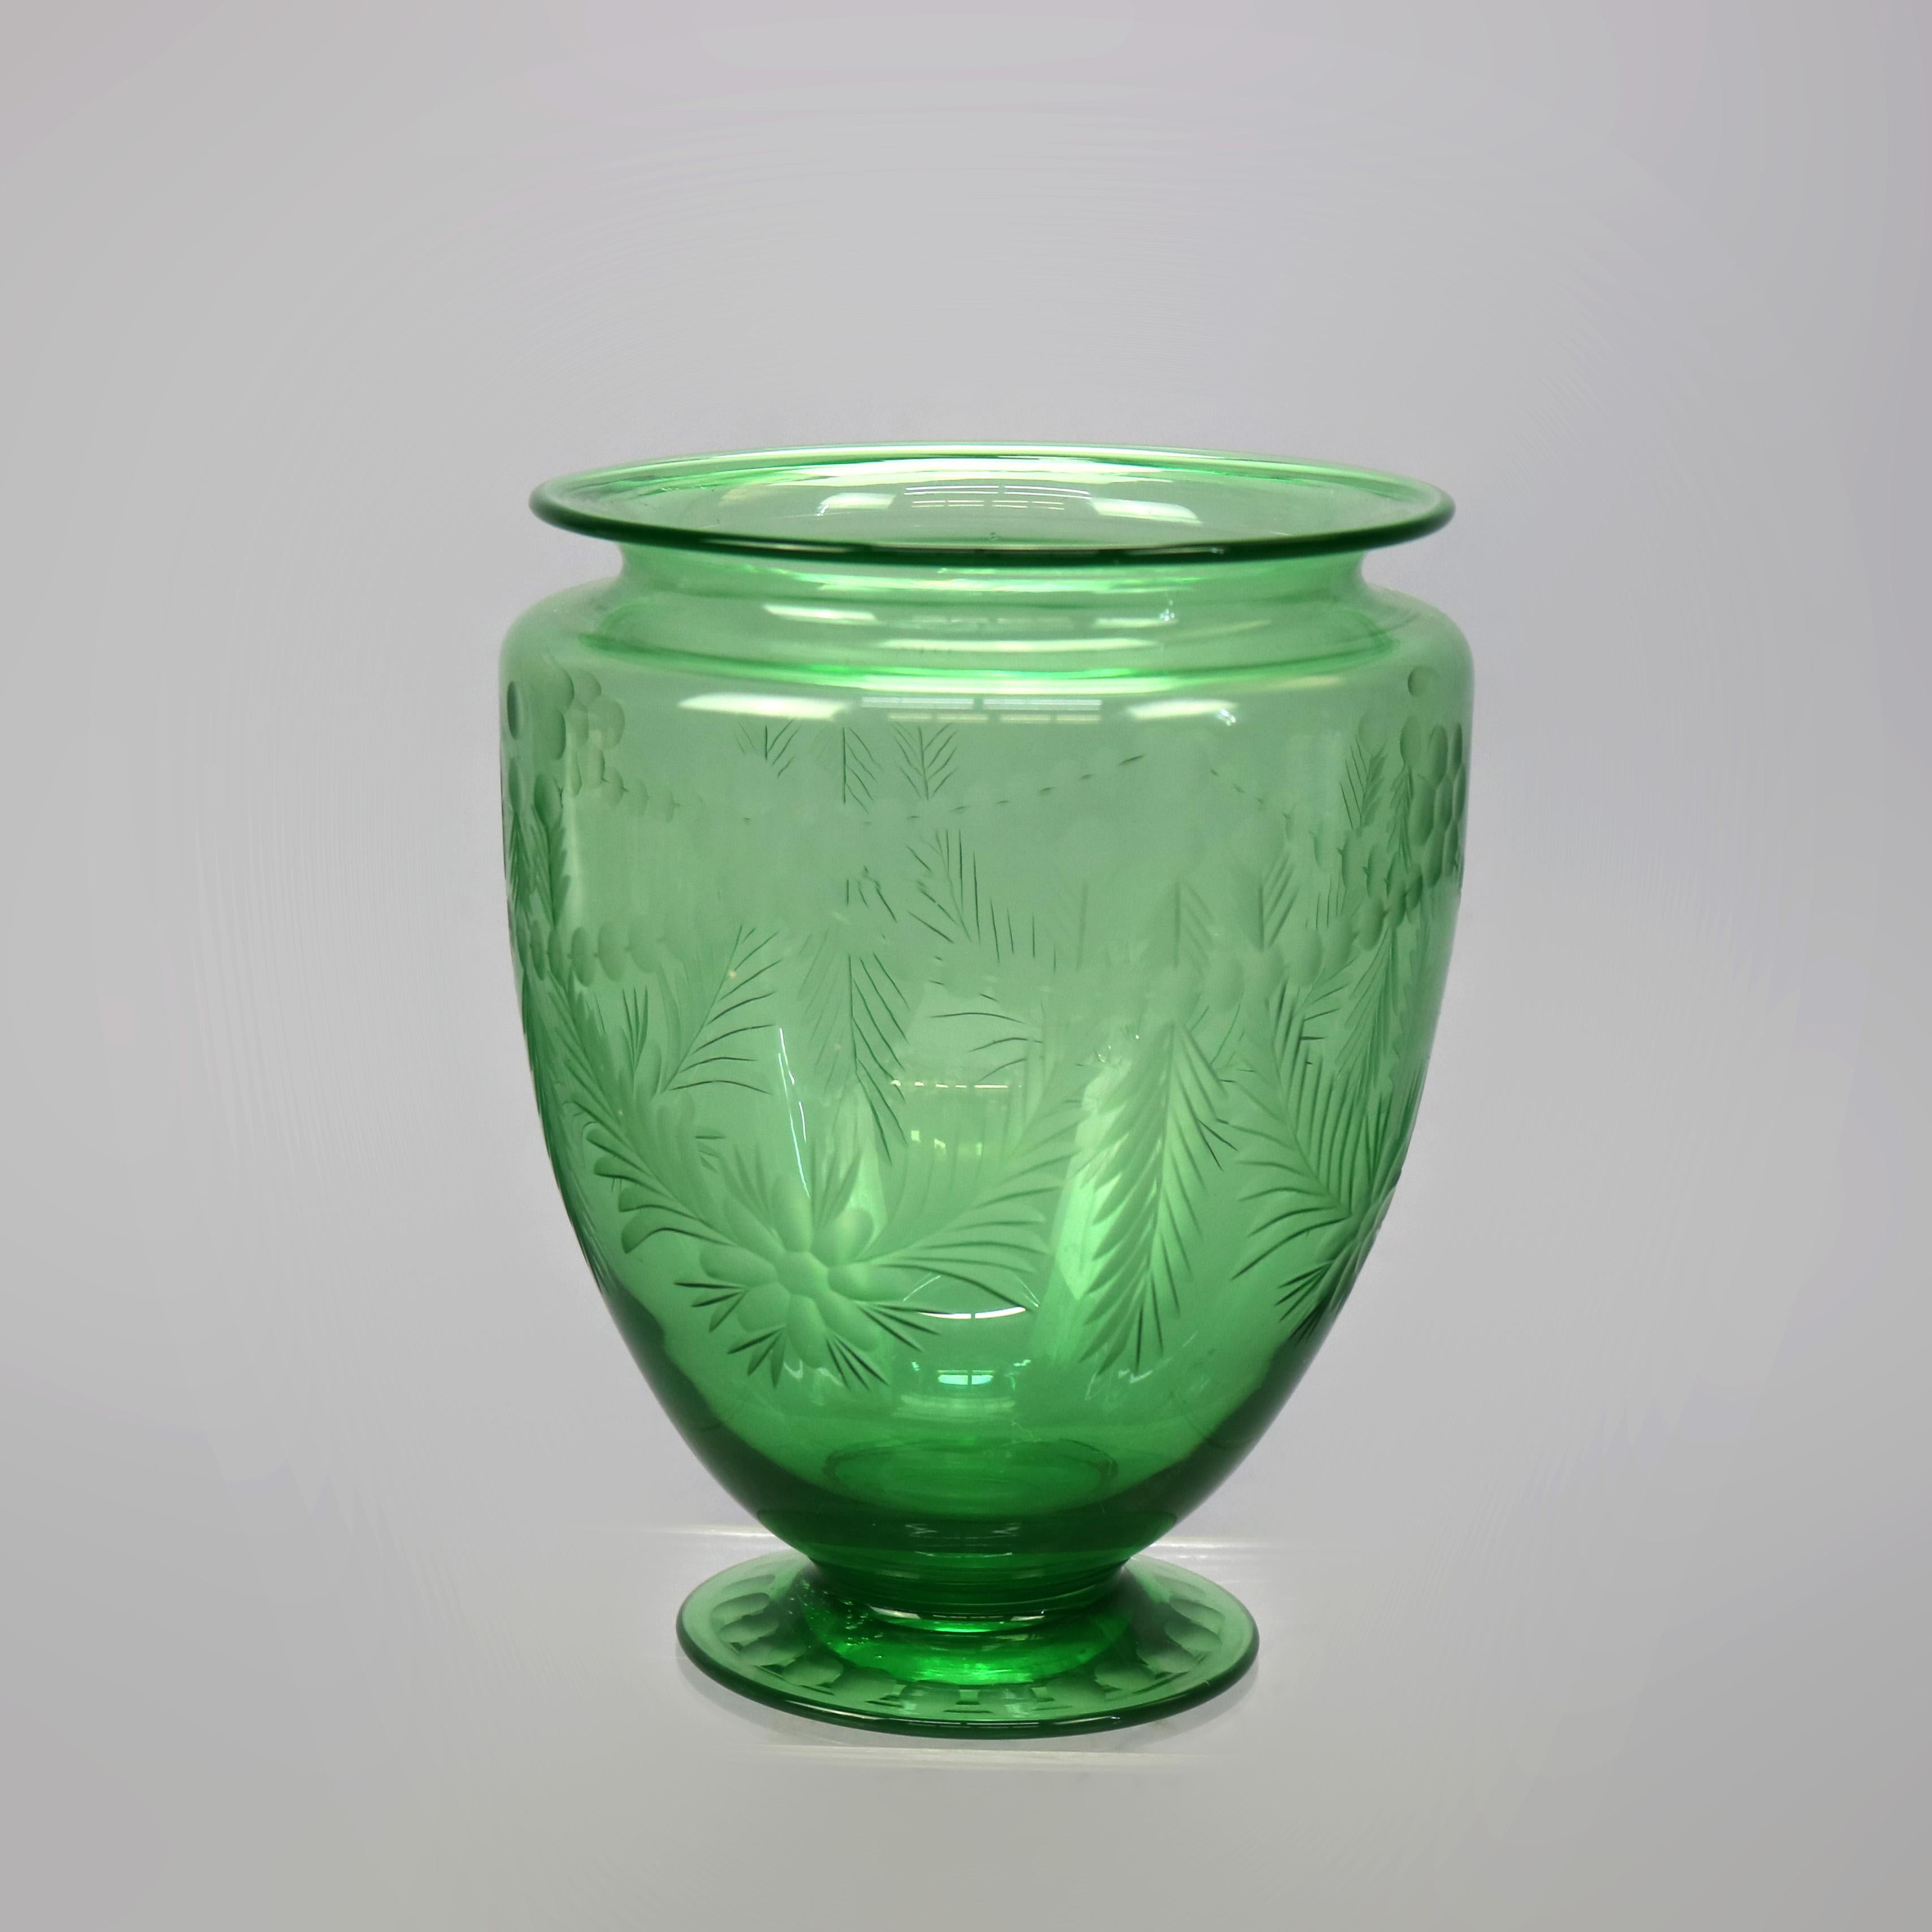 An antique vase by Hawkes or Sinclaire offers green glass construction with acid etched foliate design, raised on foot with repeating thumb print pattern, unsigned, c1930

Measures - 7''H x 5.5''W x 5.5''D.